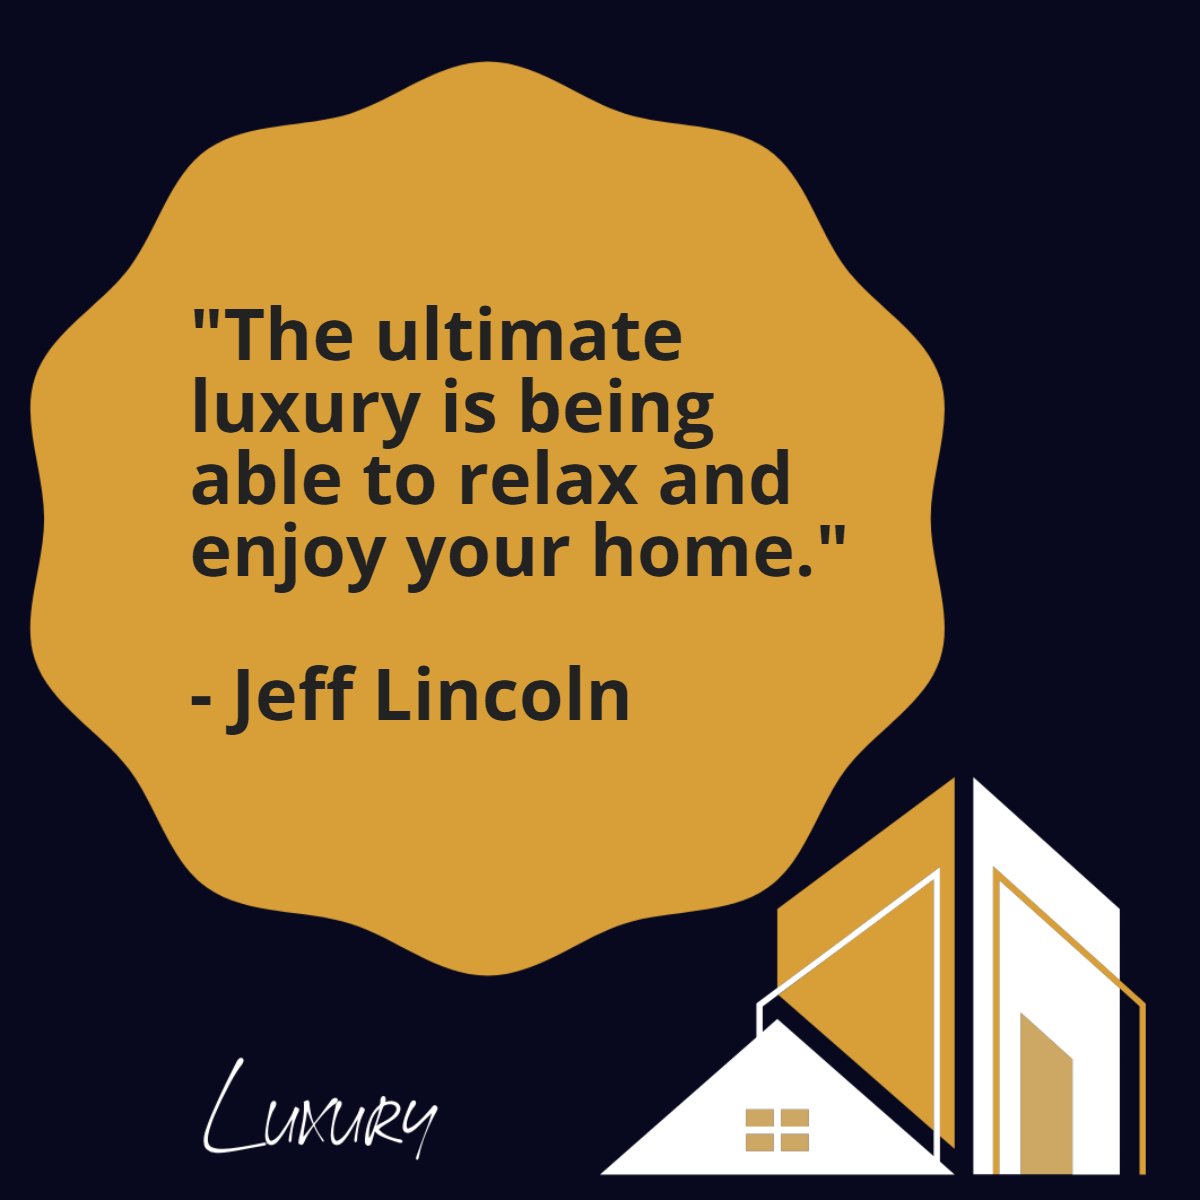 'The ultimate luxury is being able to relax and enjoy your home'
― Jeff Lincoln 📖

#luxurylifestyle #luxury #lovemyhome #home #lifestyle #jefflincoln #quote #quoteoftheday✏️